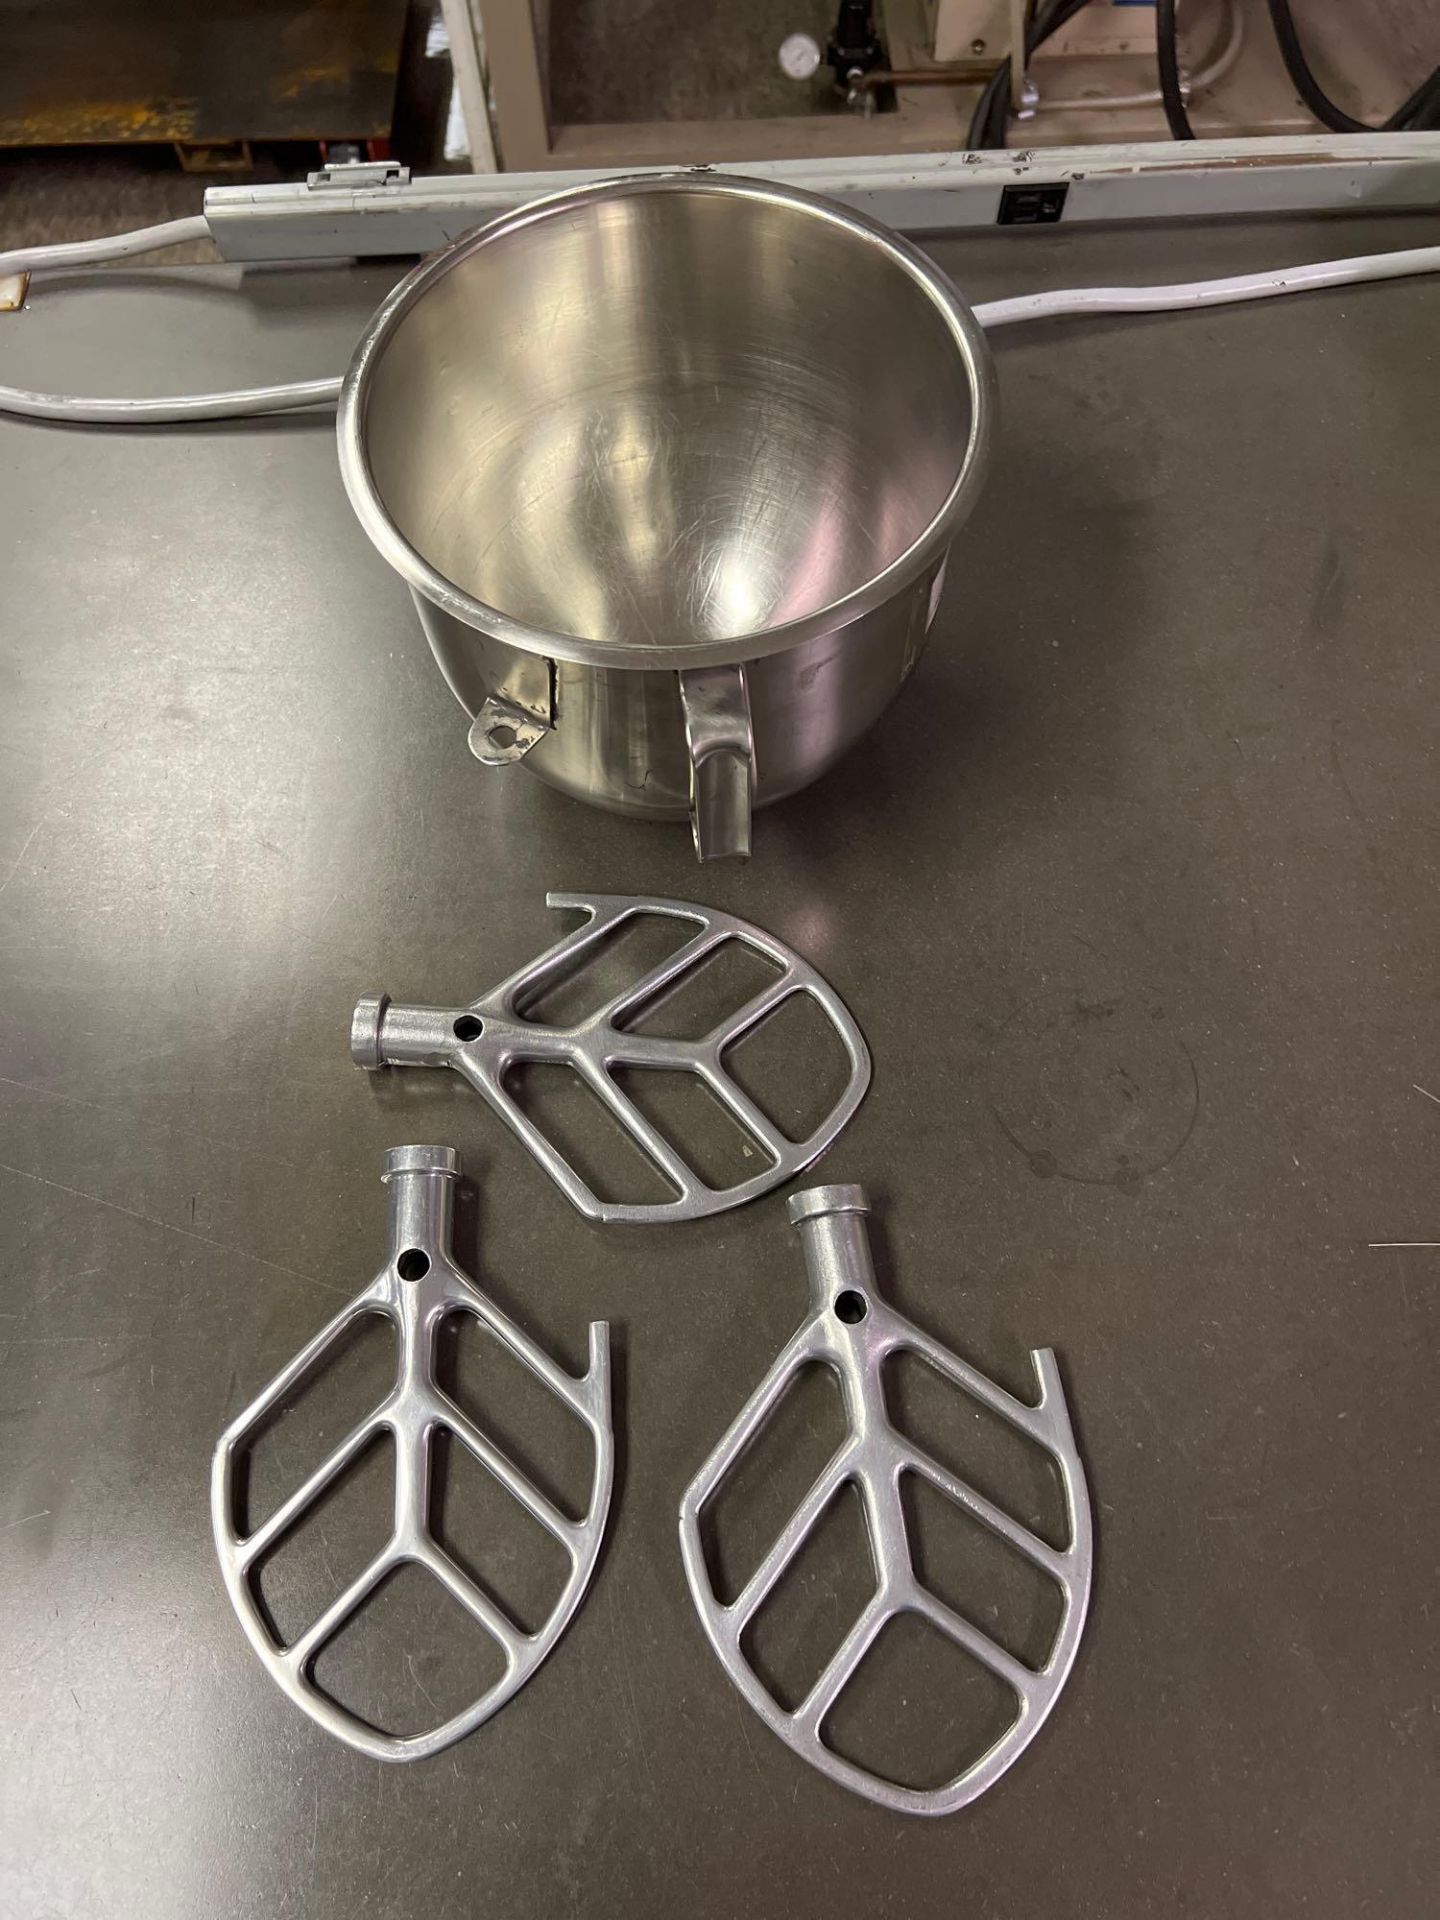 Lot of (3) Aluminum B Beater Paddles and (1) Stainless Steel Bowl for N-50 Hobart Mixers - Image 3 of 3